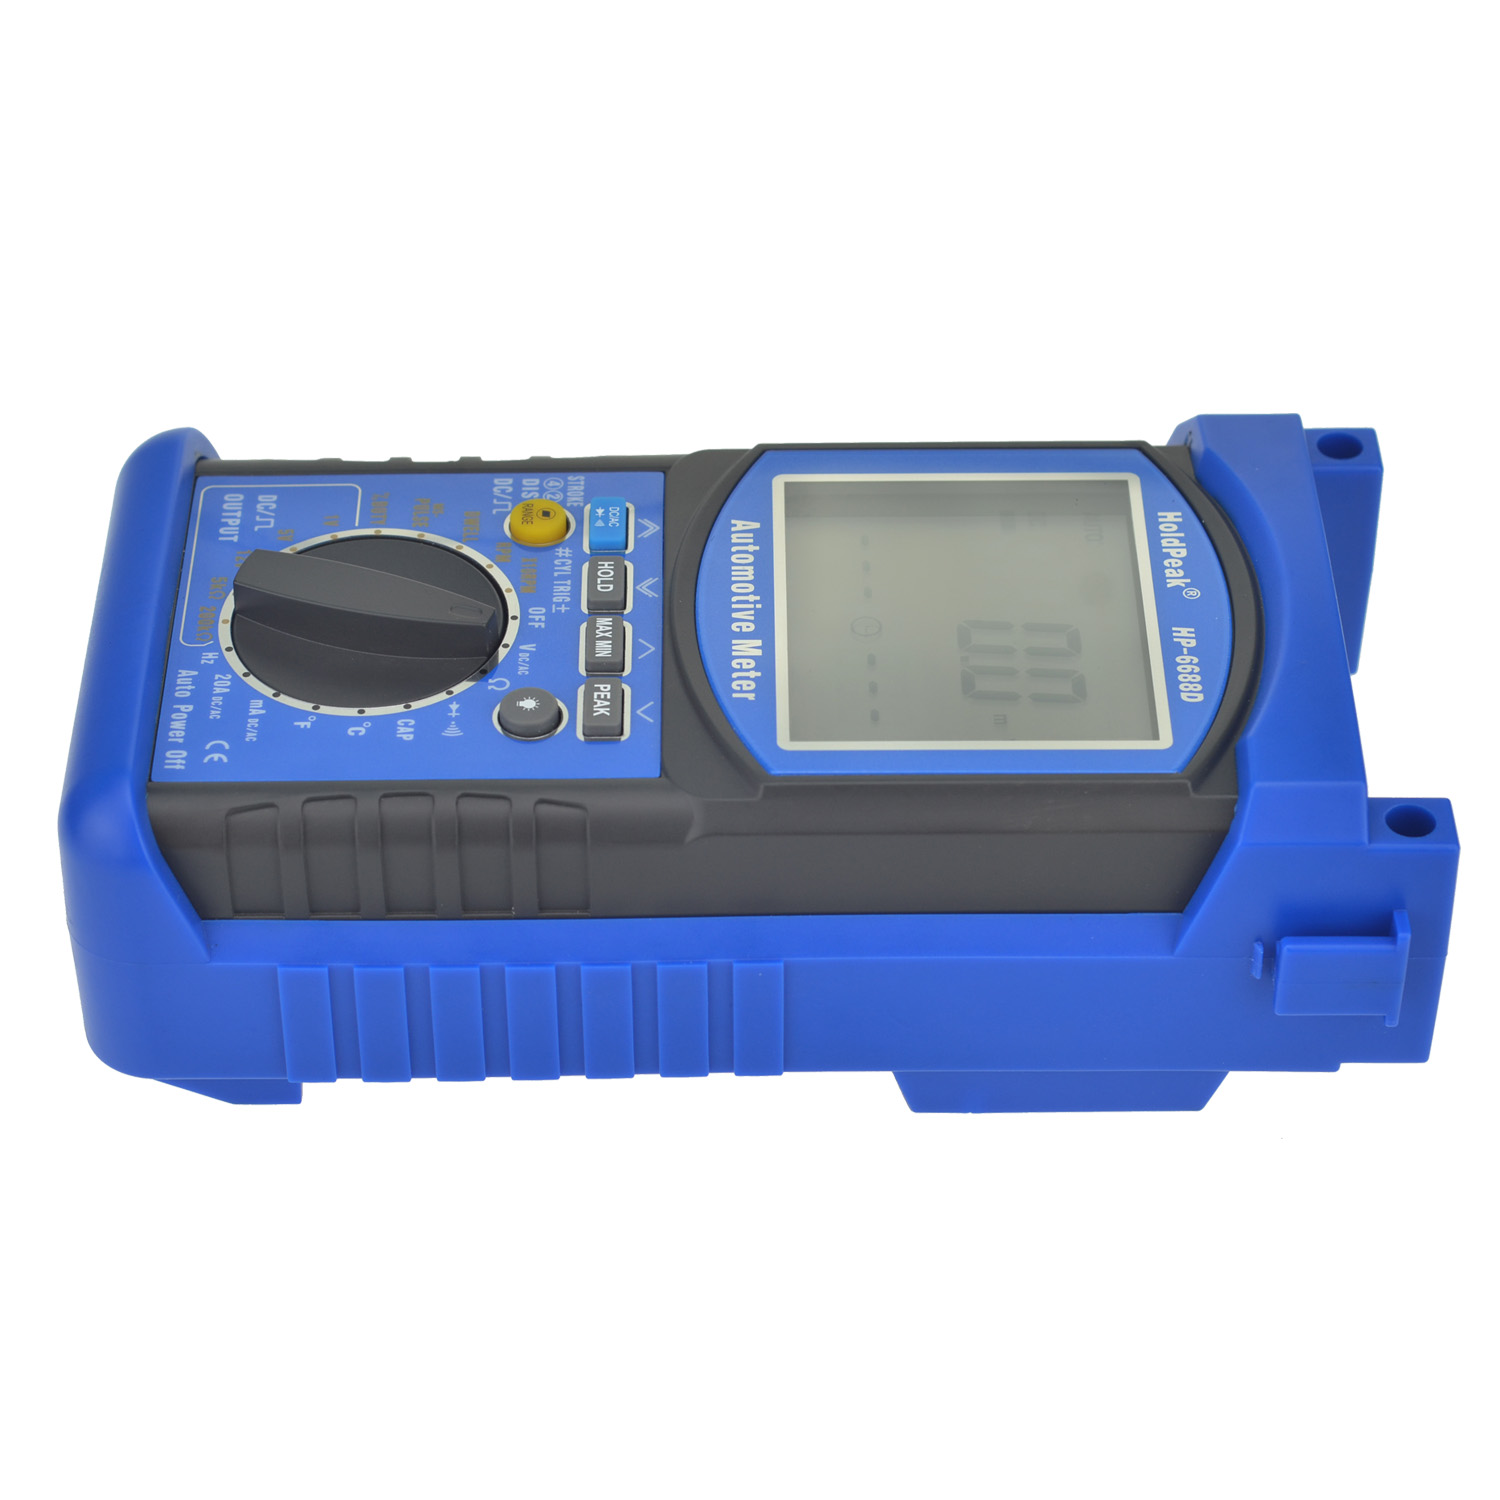 HoldPeak repair aircraft engine monitoring instruments Suppliers